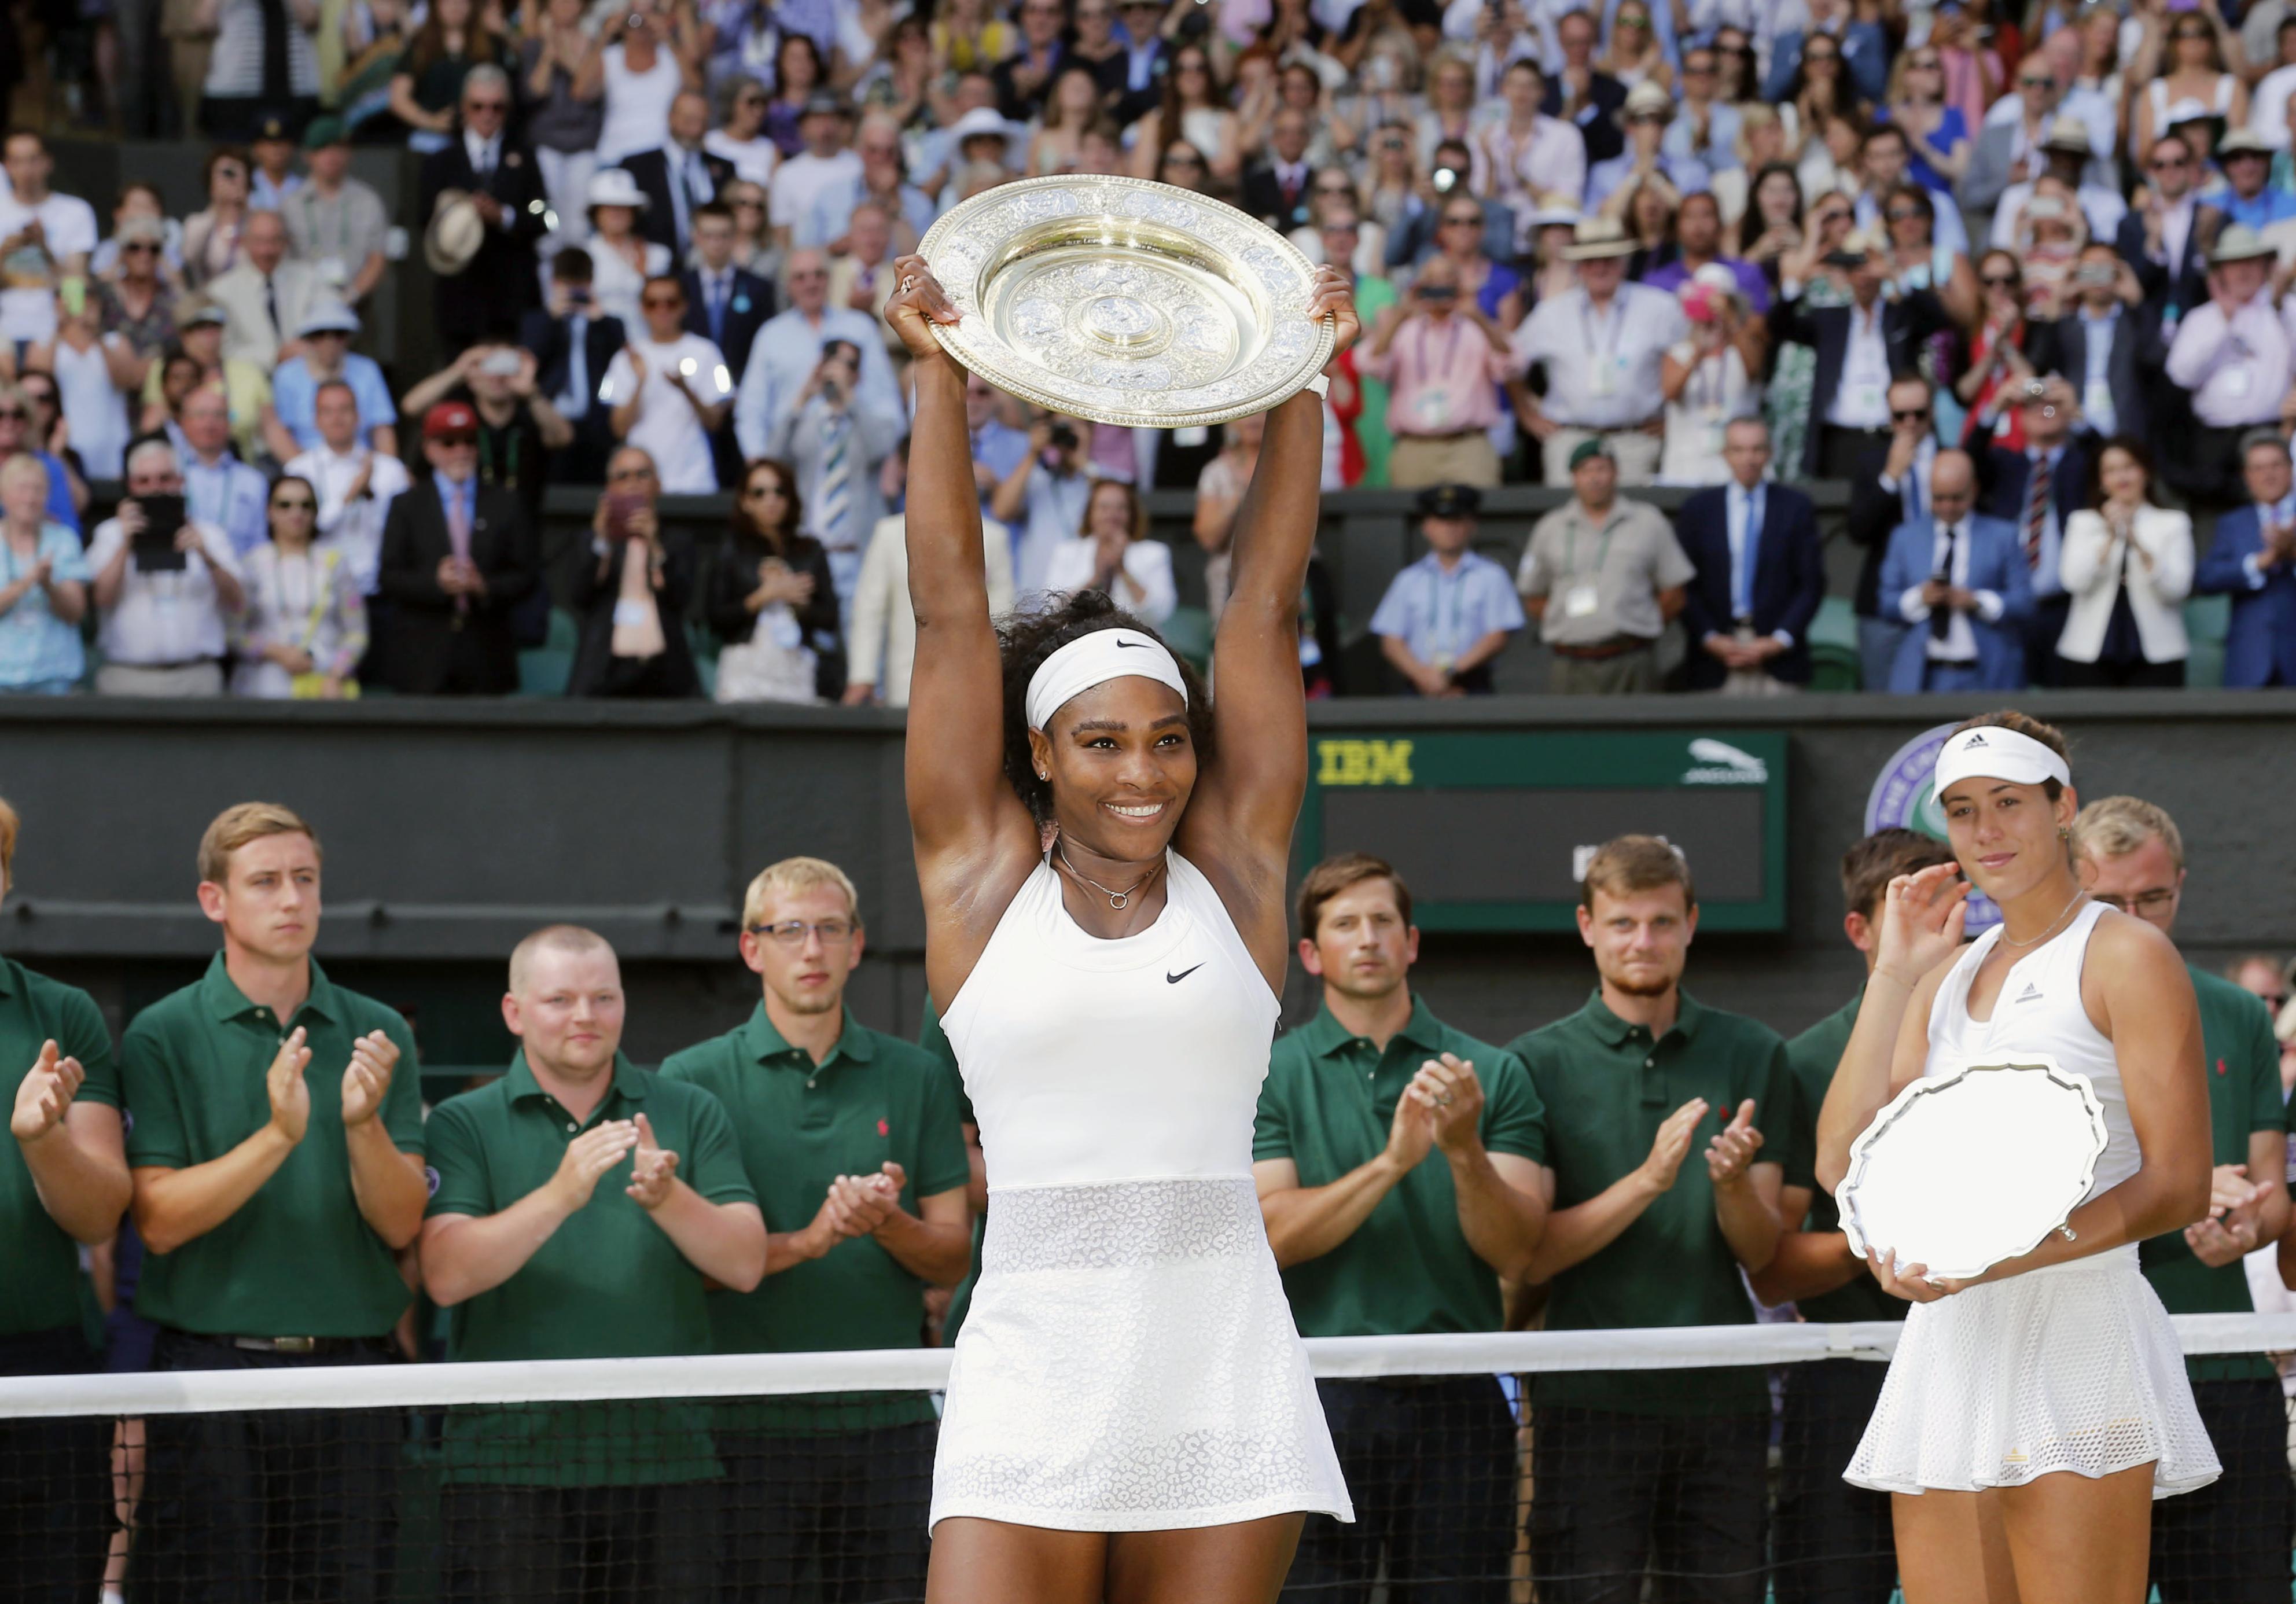 Serena Williams lifts the Venus Rosewater Dish after her sixth Wimbledon title triumph. Photo: Kyodo